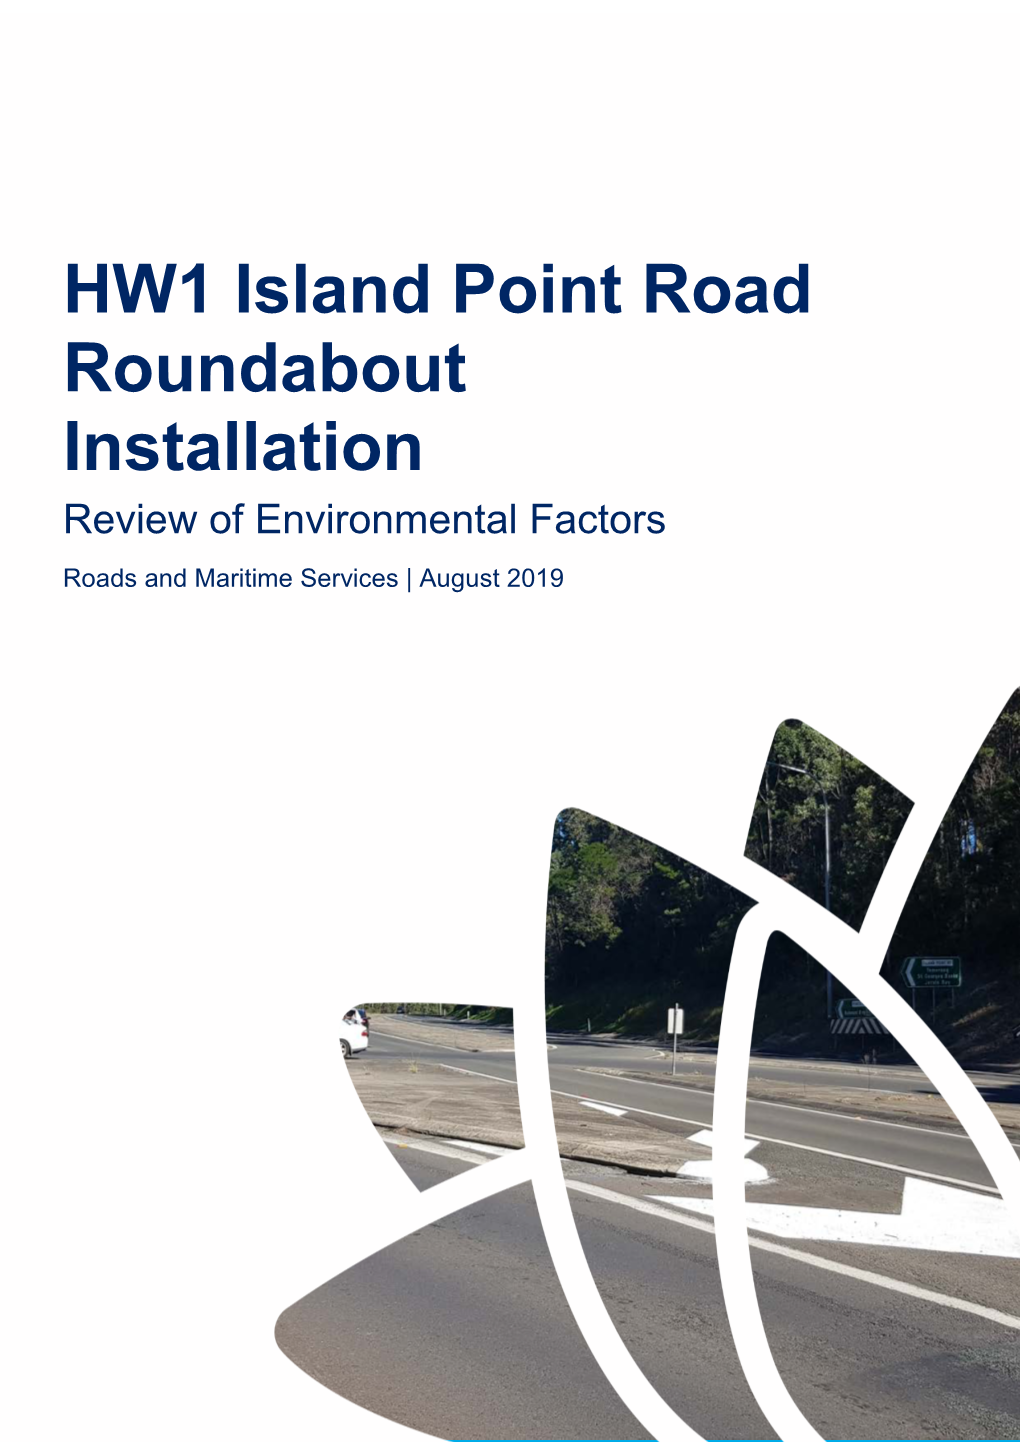 HW1 Island Point Road Roundabout Installation Review of Environmental Factors Roads and Maritime Services | August 2019